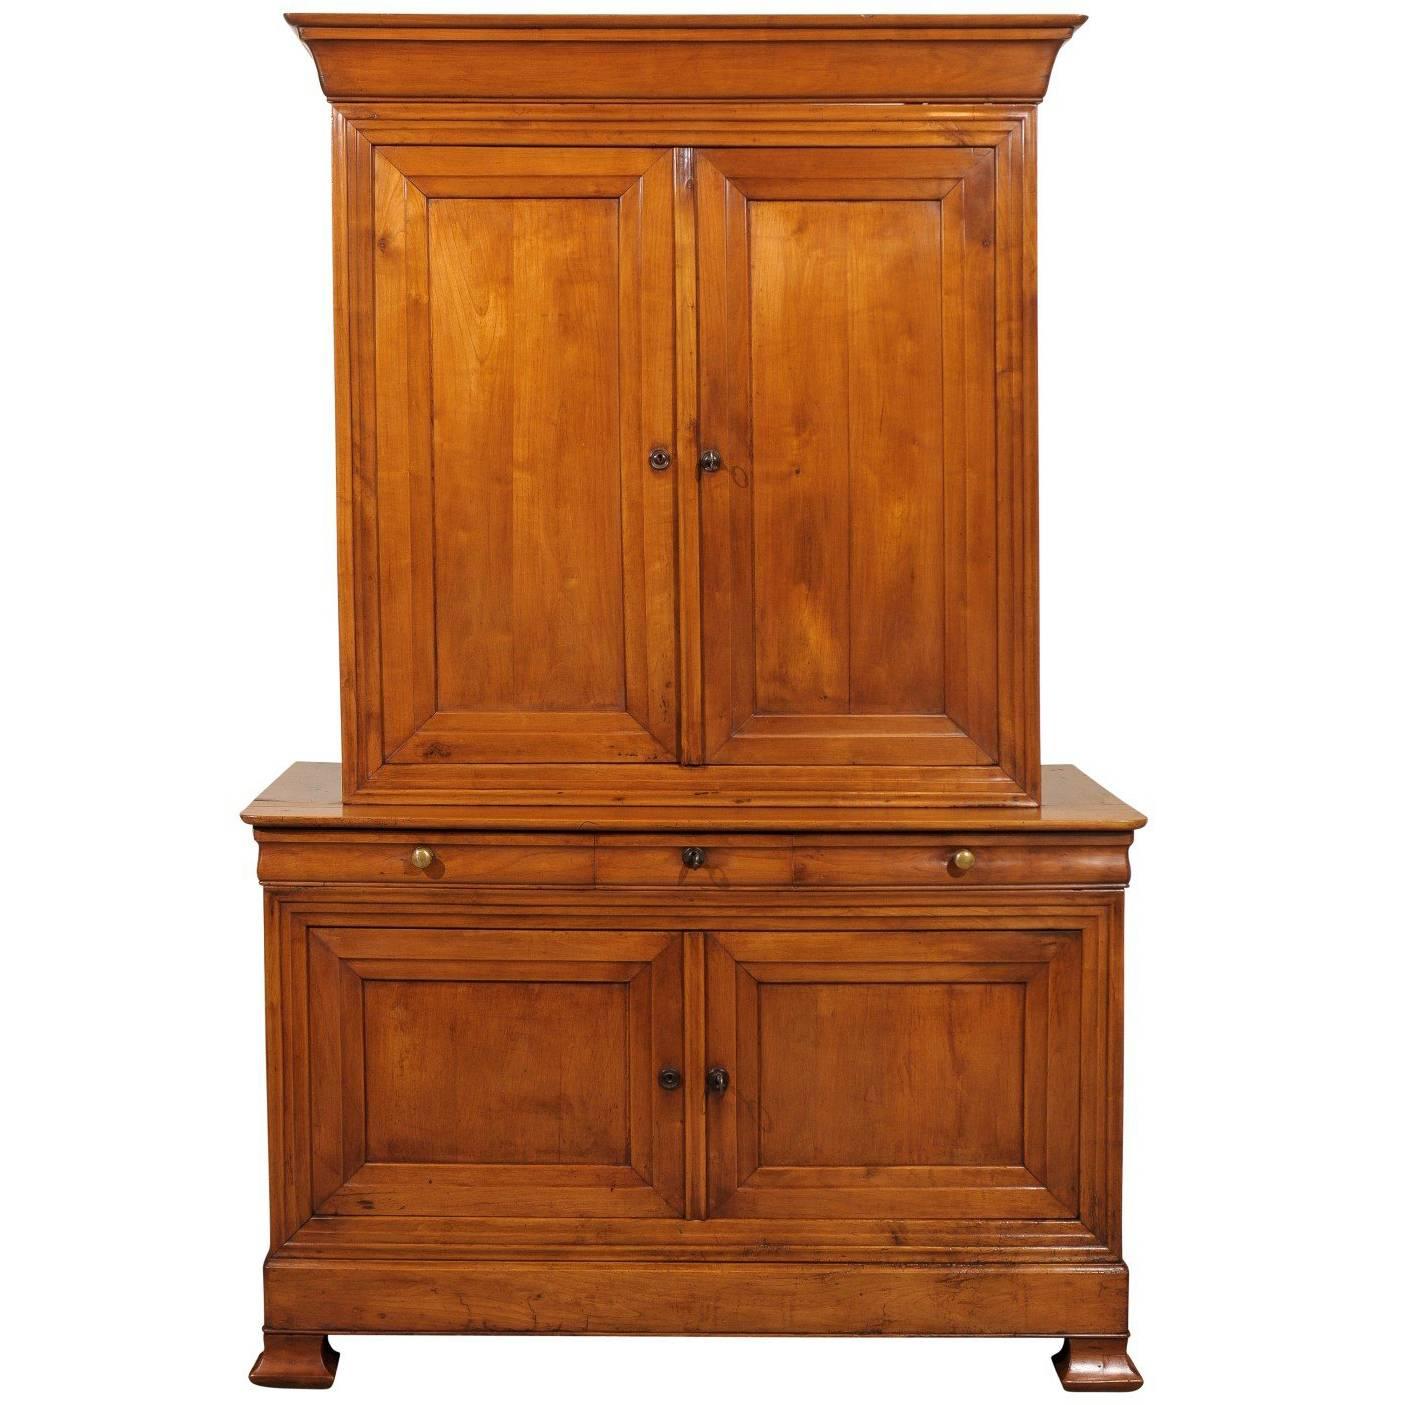 Period Louis Philippe Buffet Deux Corps in Cherry, circa 1830 For Sale